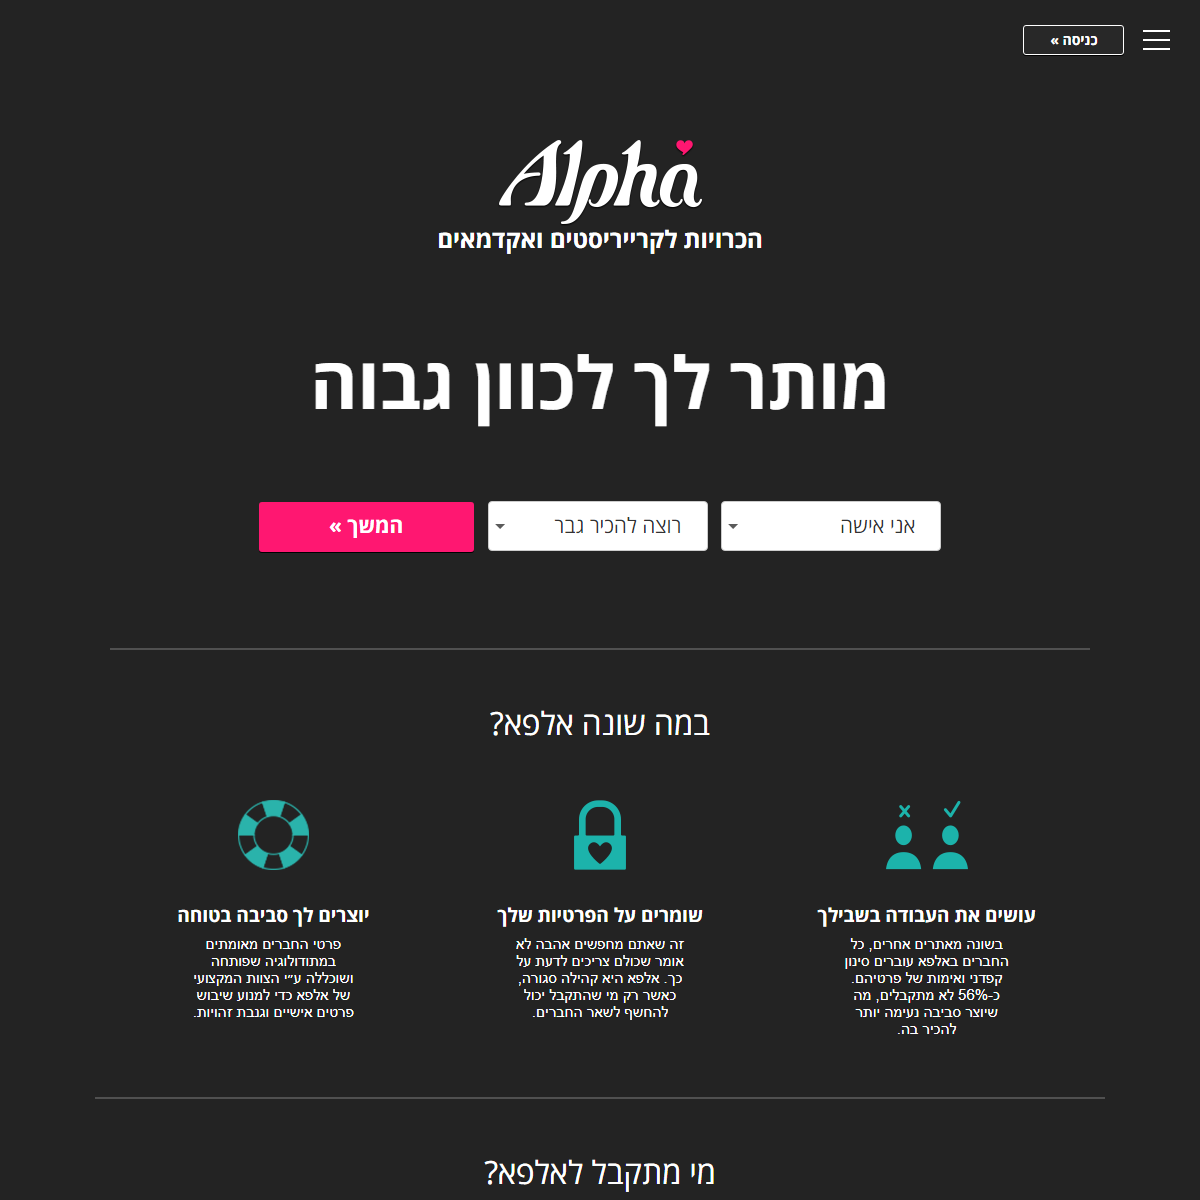 A complete backup of http://www.alpha.co.il/